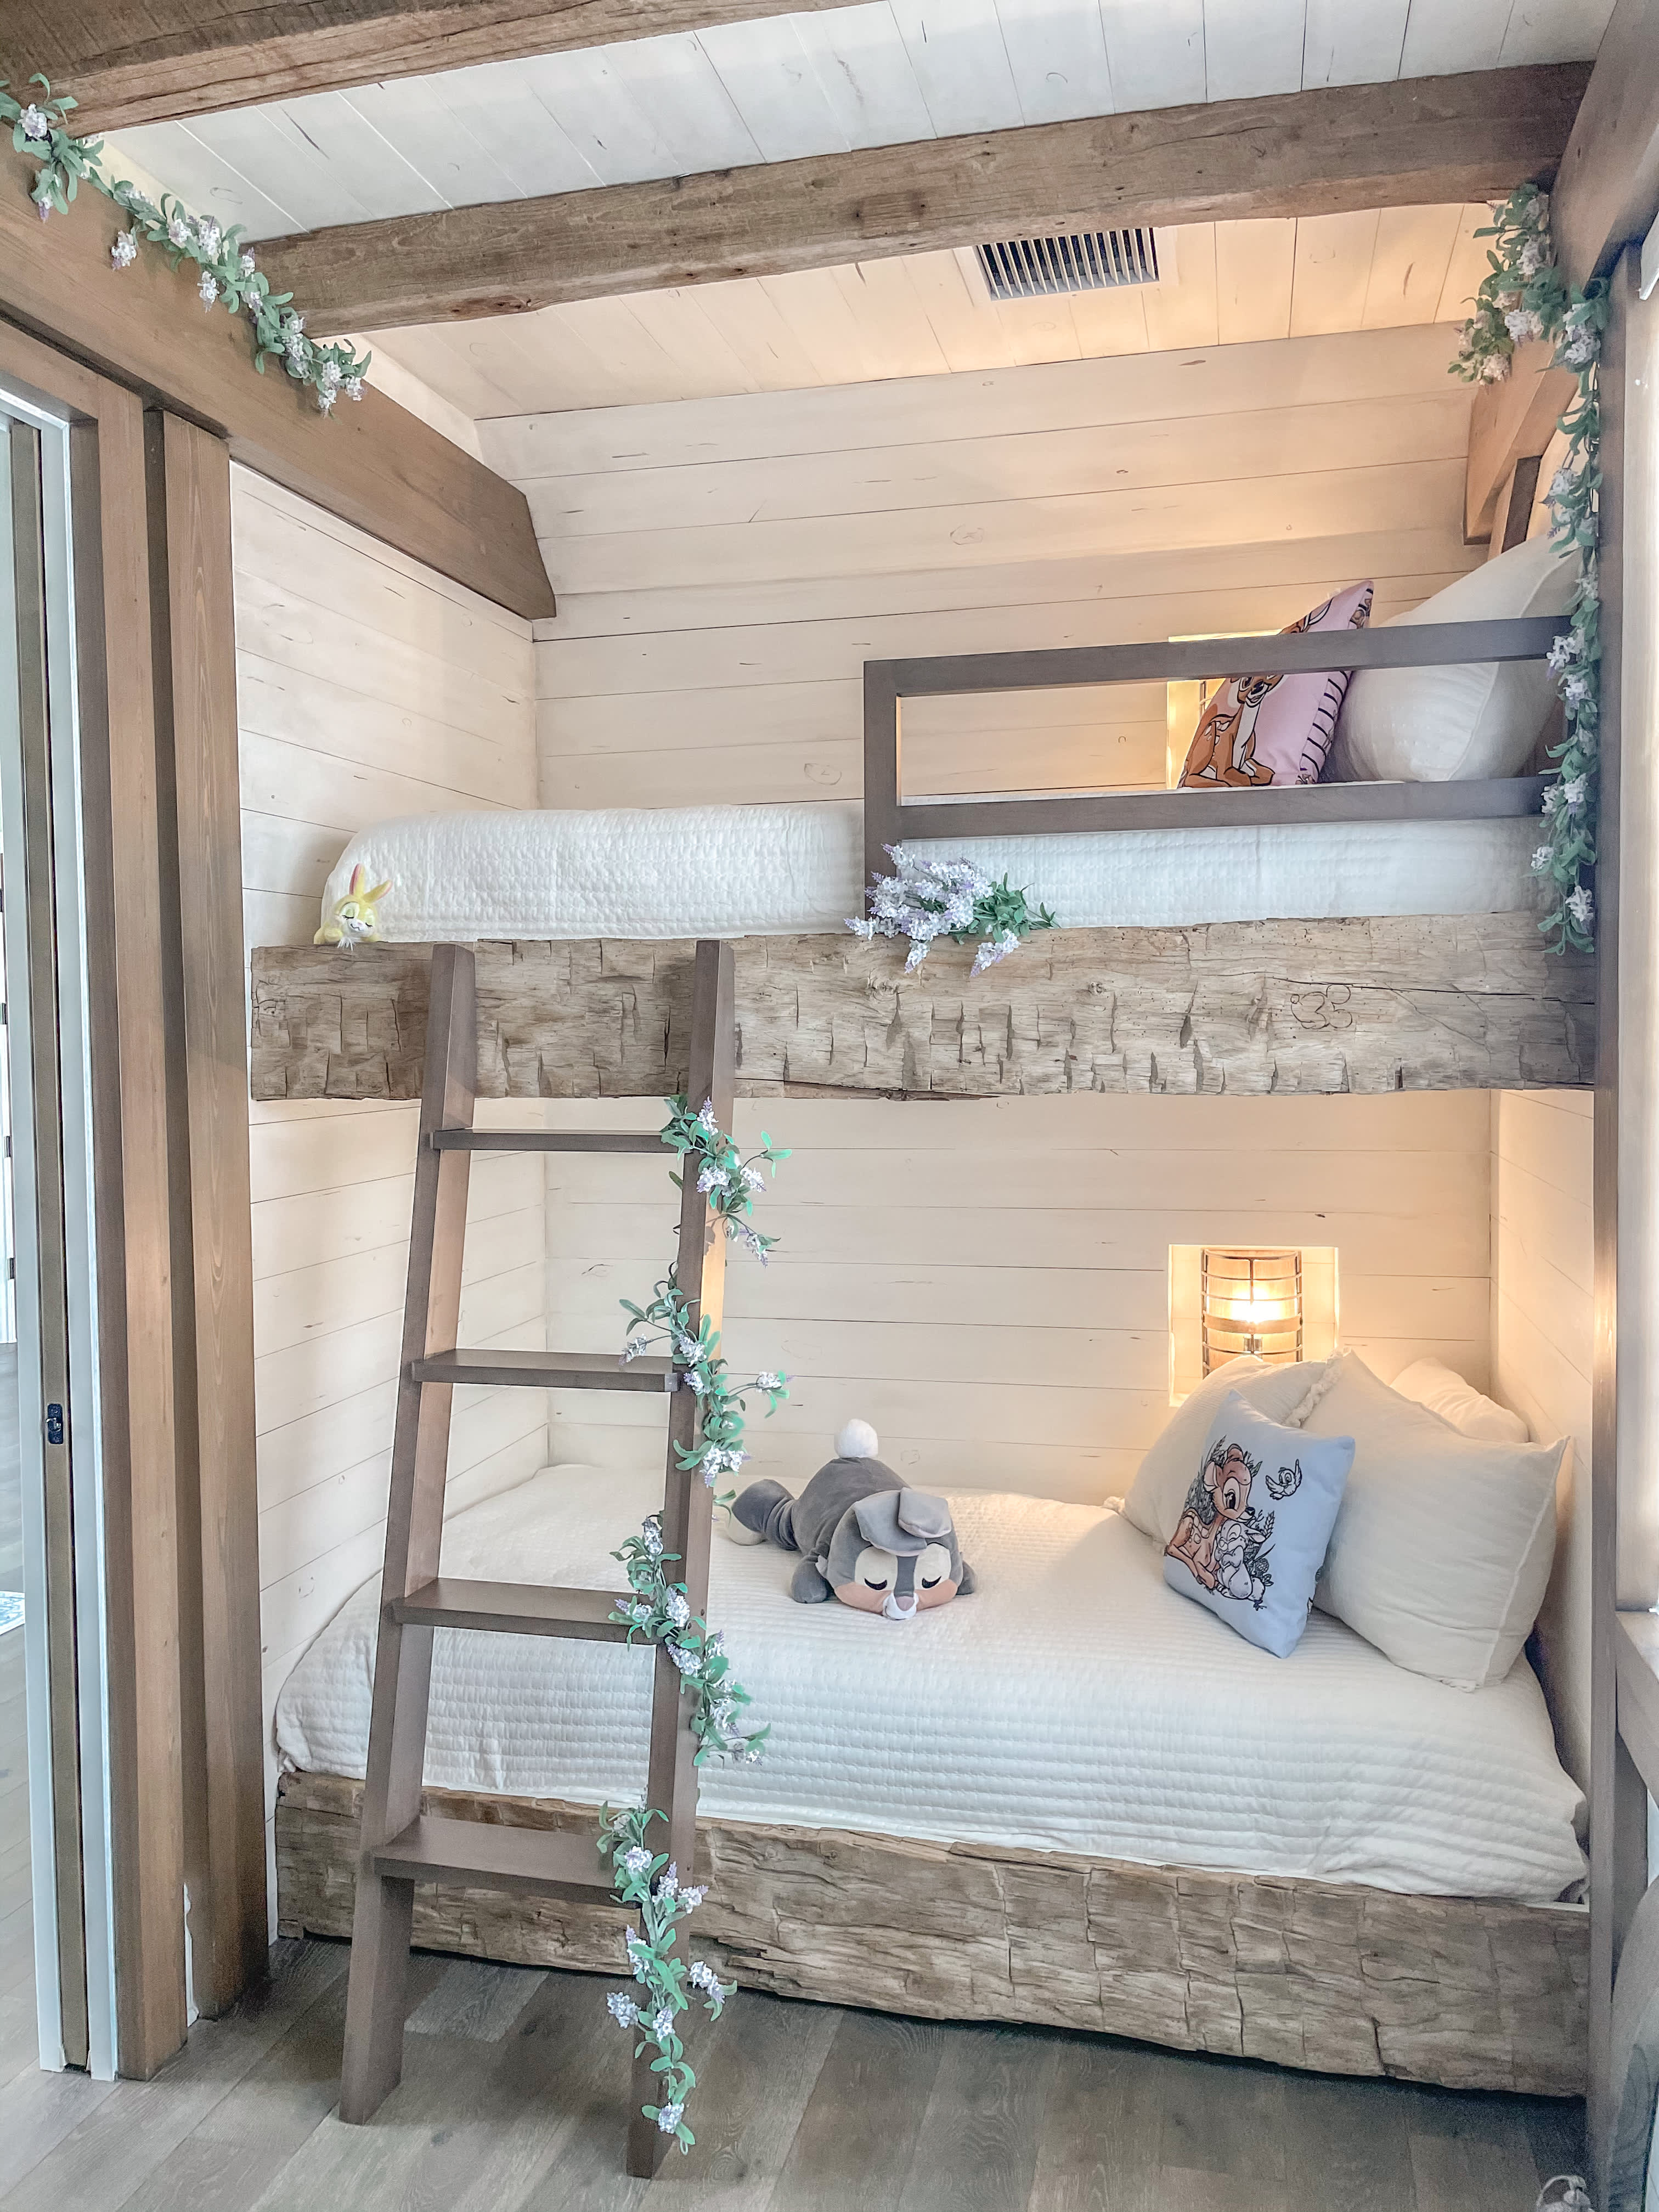 The cozy bunk beds in this "Bambi"-themed room makes it a family favorite.